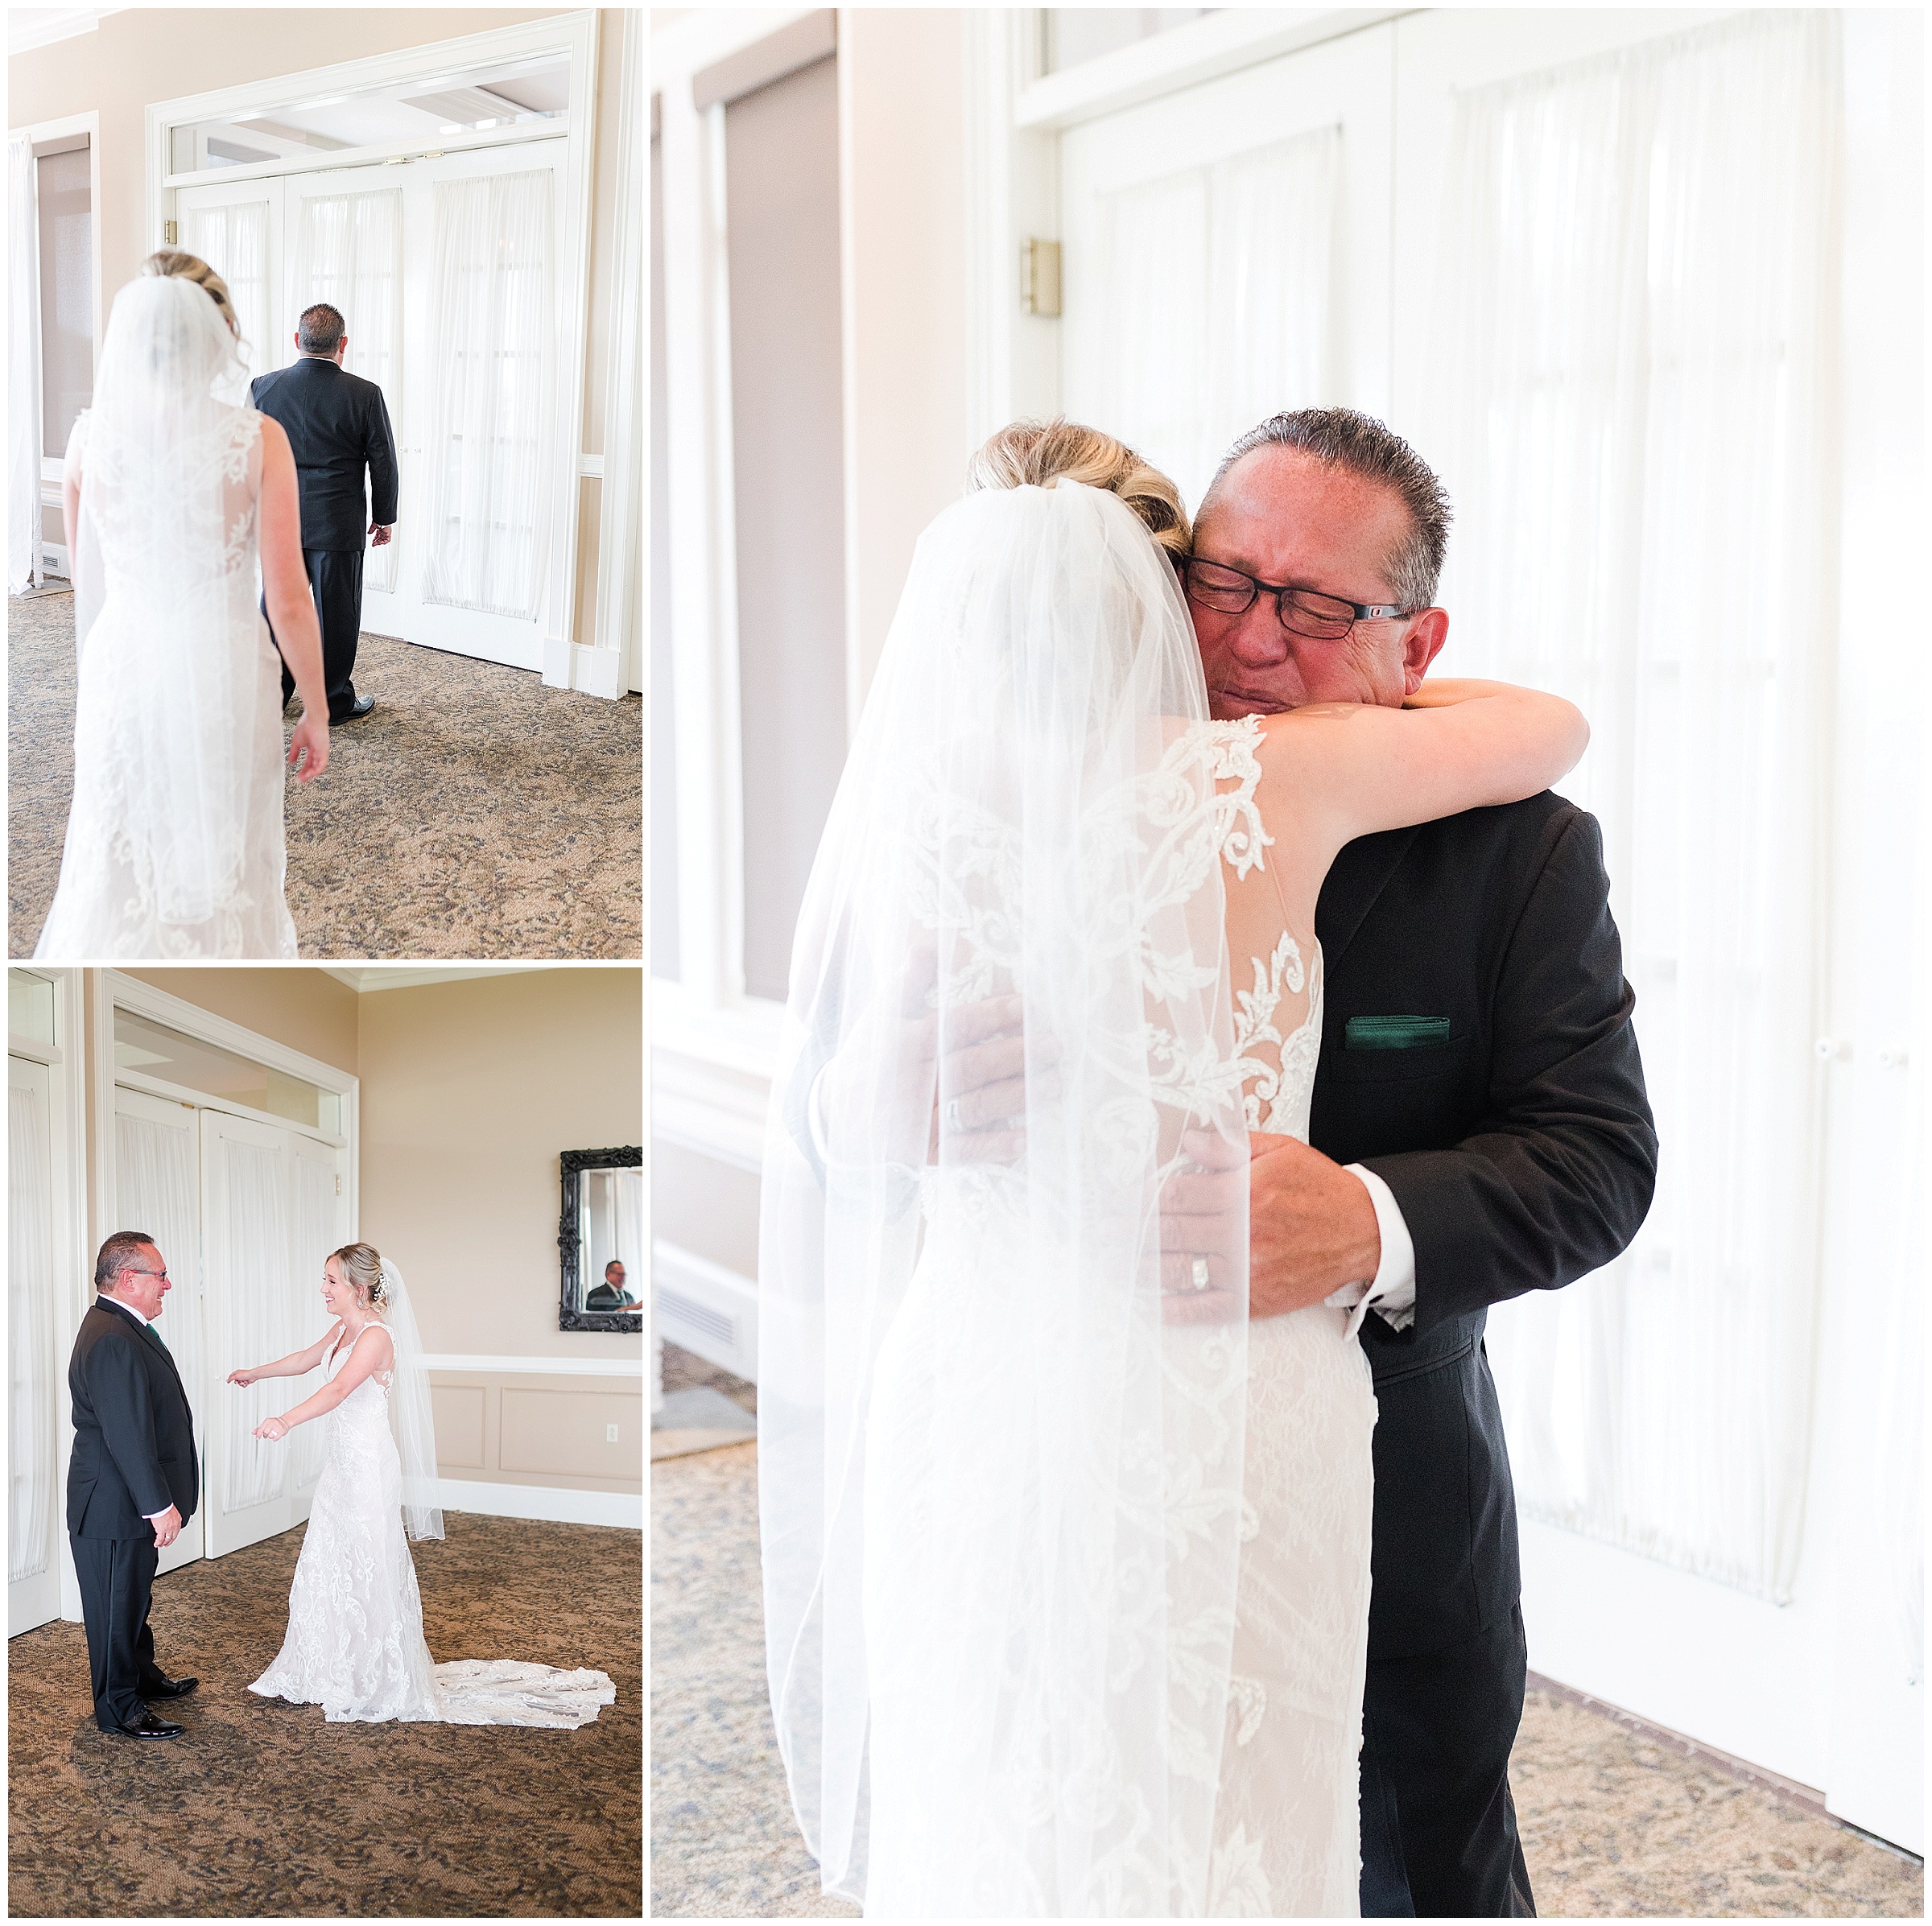 first look with dad; father seeing his bride daughter for the first time on her wedding day